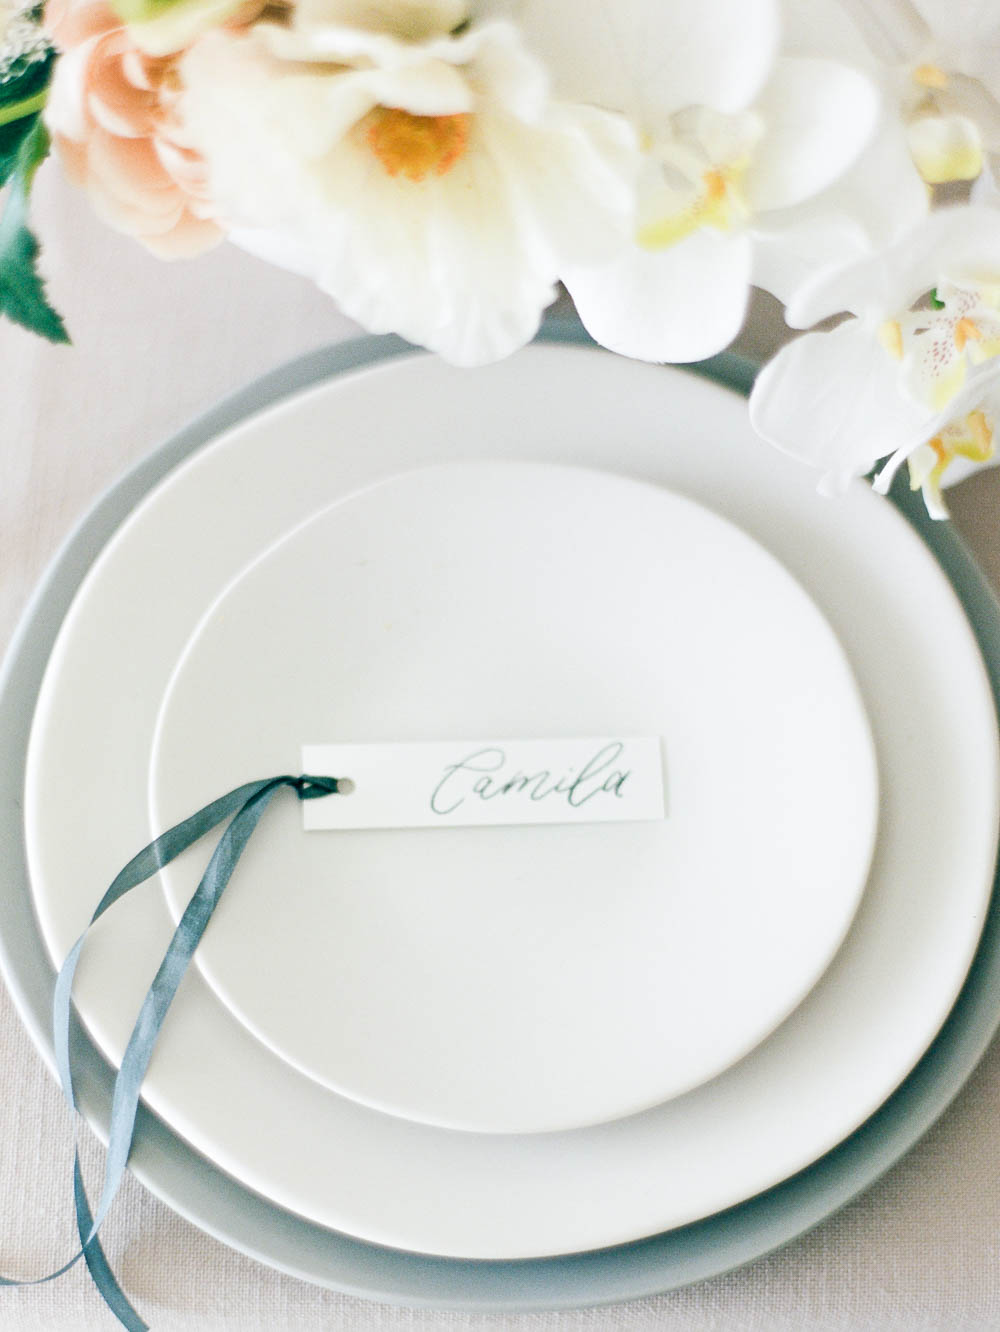 Name card on a white place setting with blue ribbon